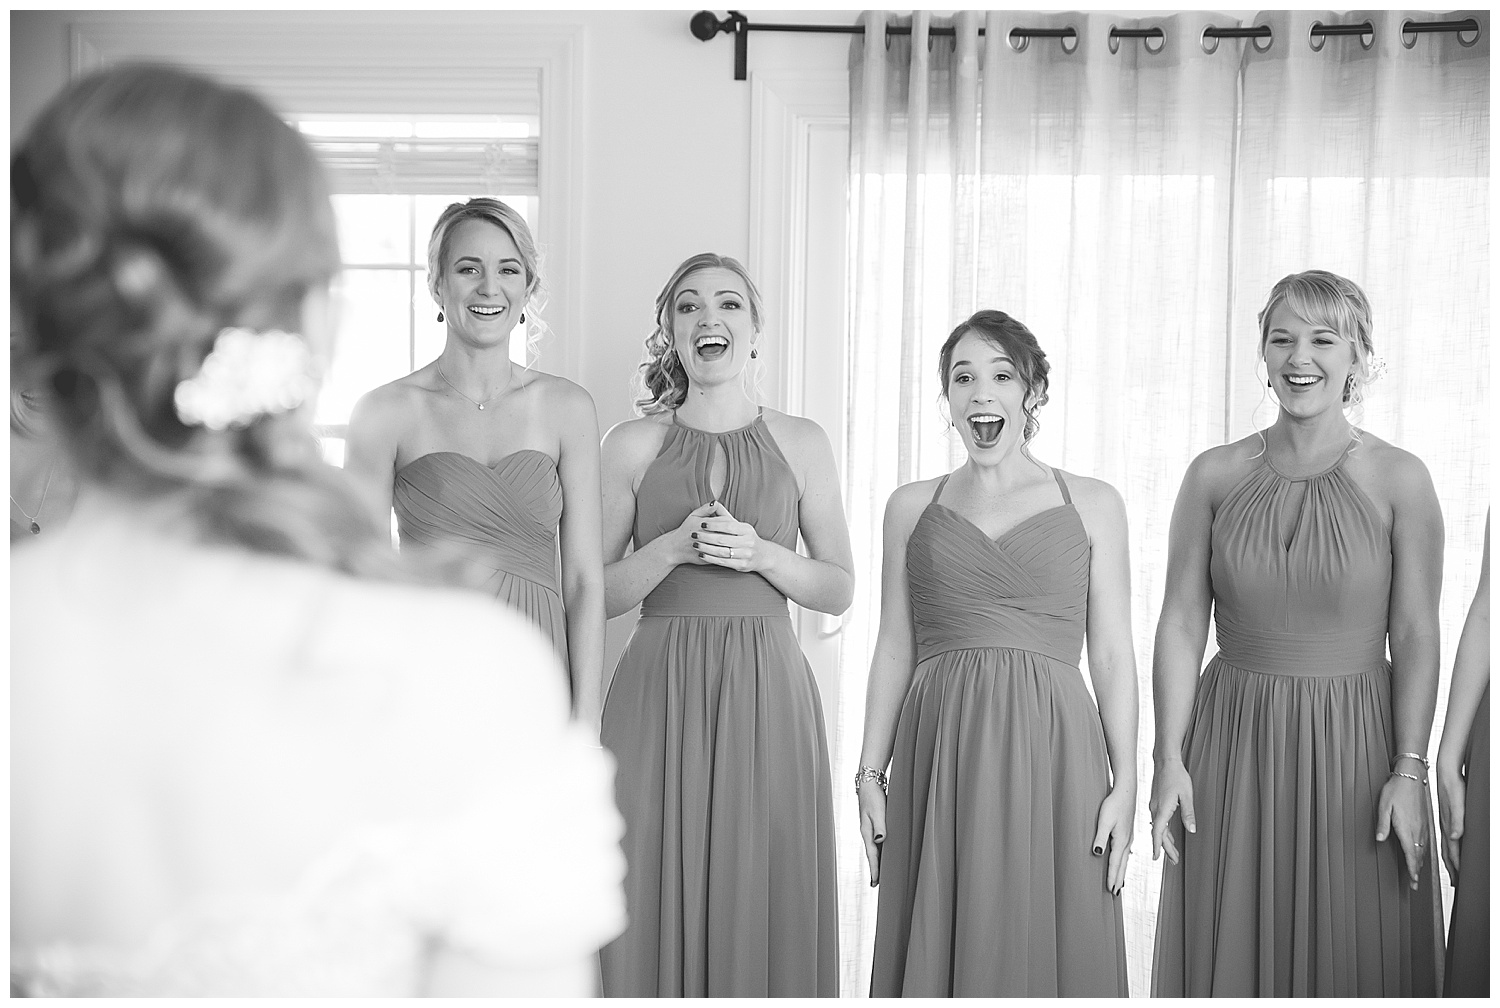 2Owl's Nest White Mountain Wedding - Bridesmaid Reveal, First Look at the Dress